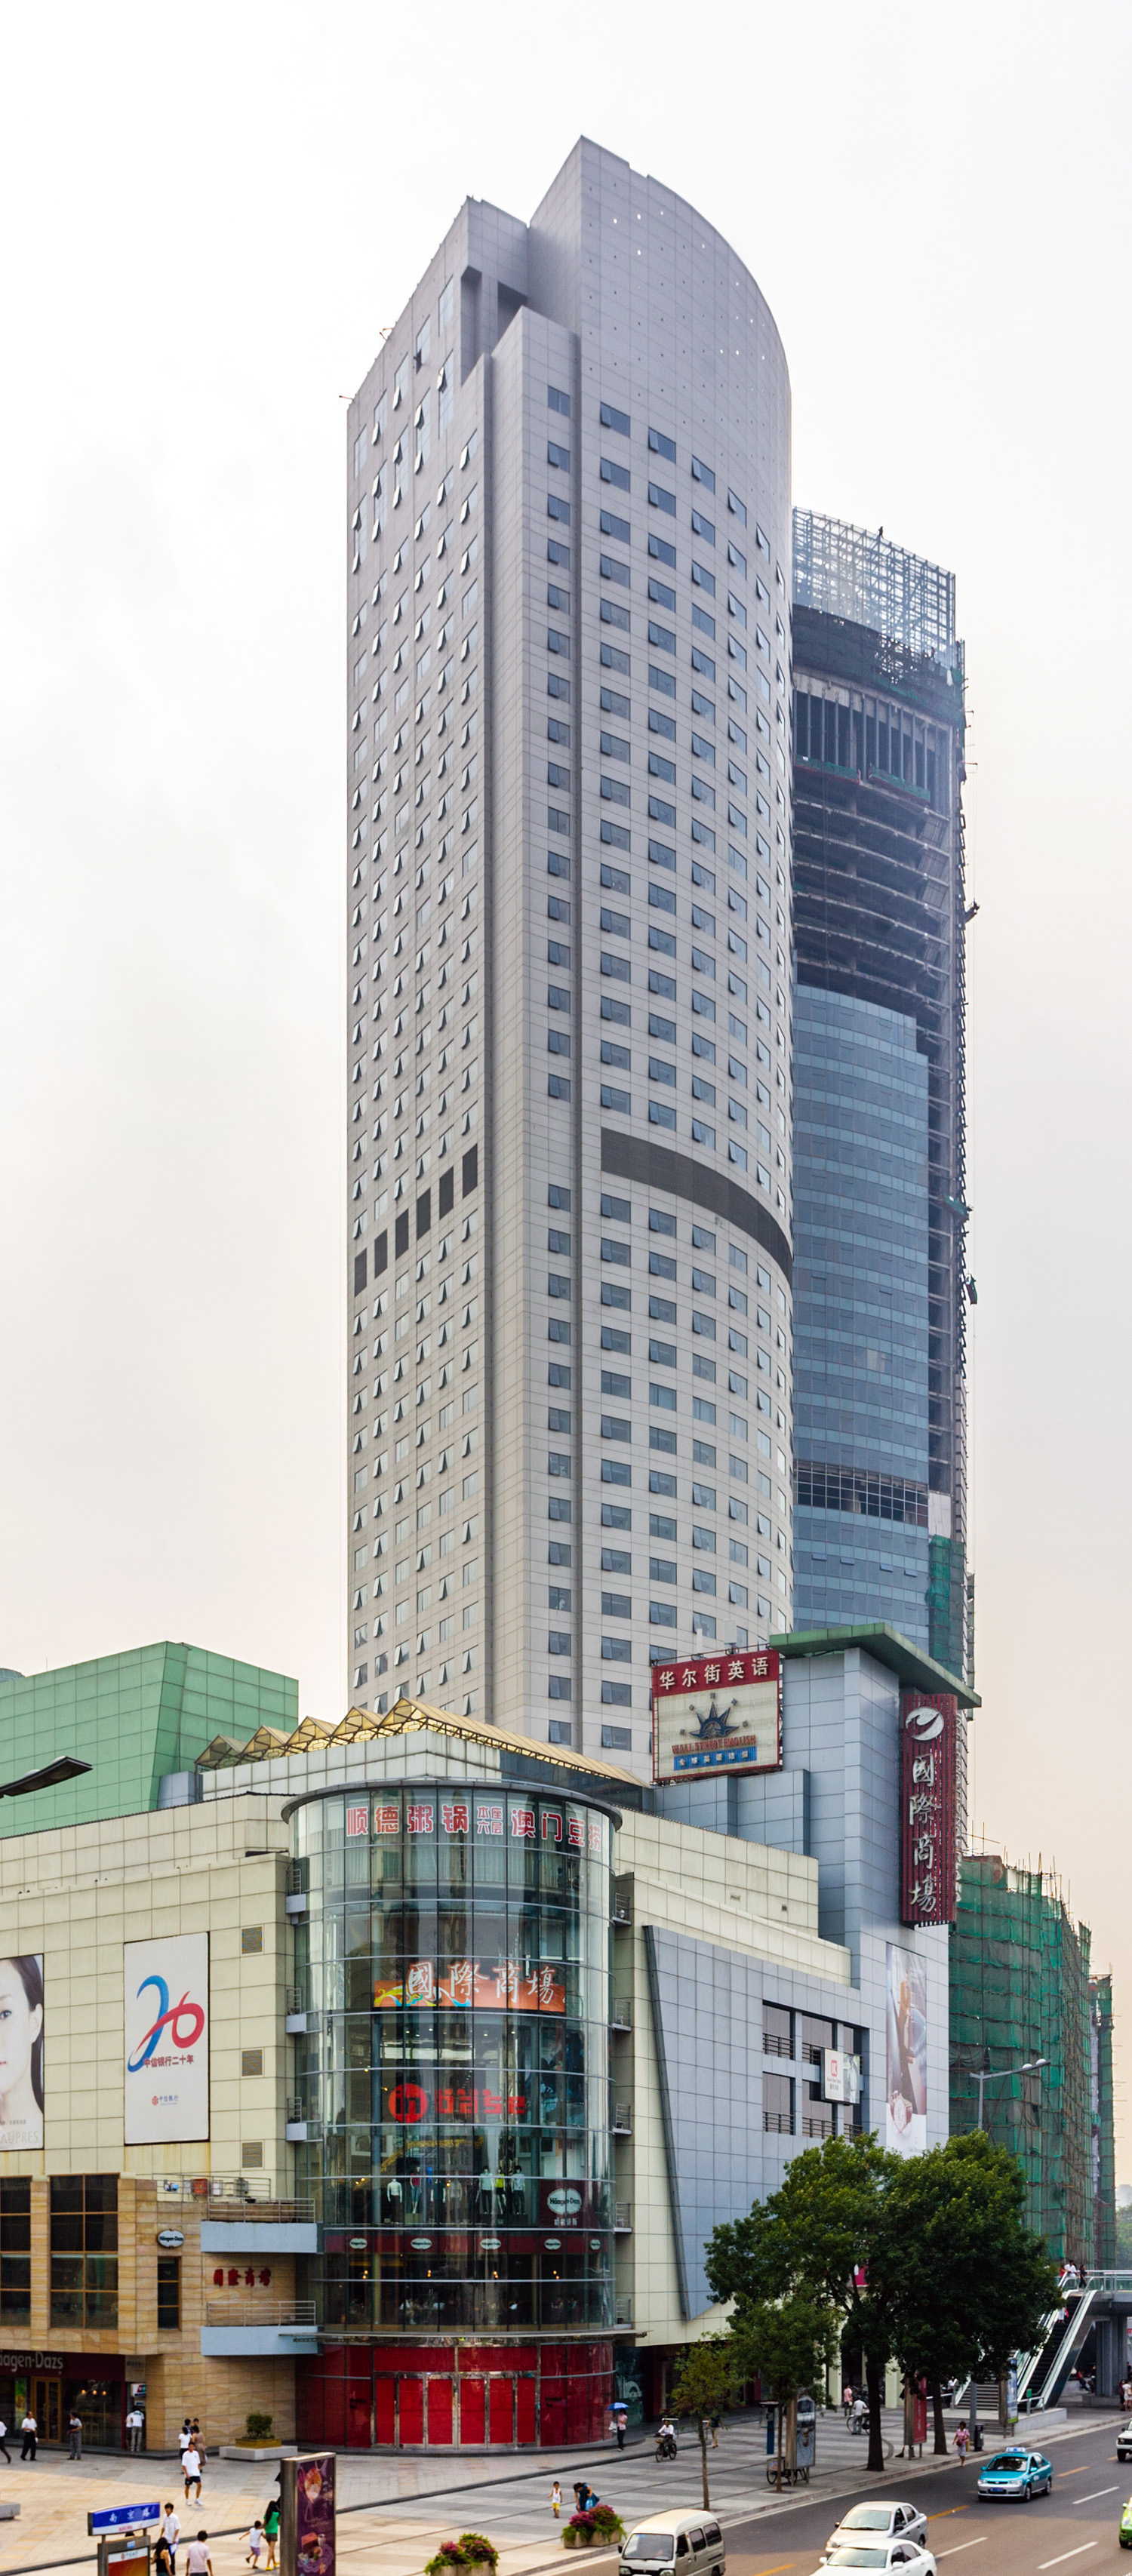 Tianjin Centre East Tower, Tianjin - View from the east. © Mathias Beinling